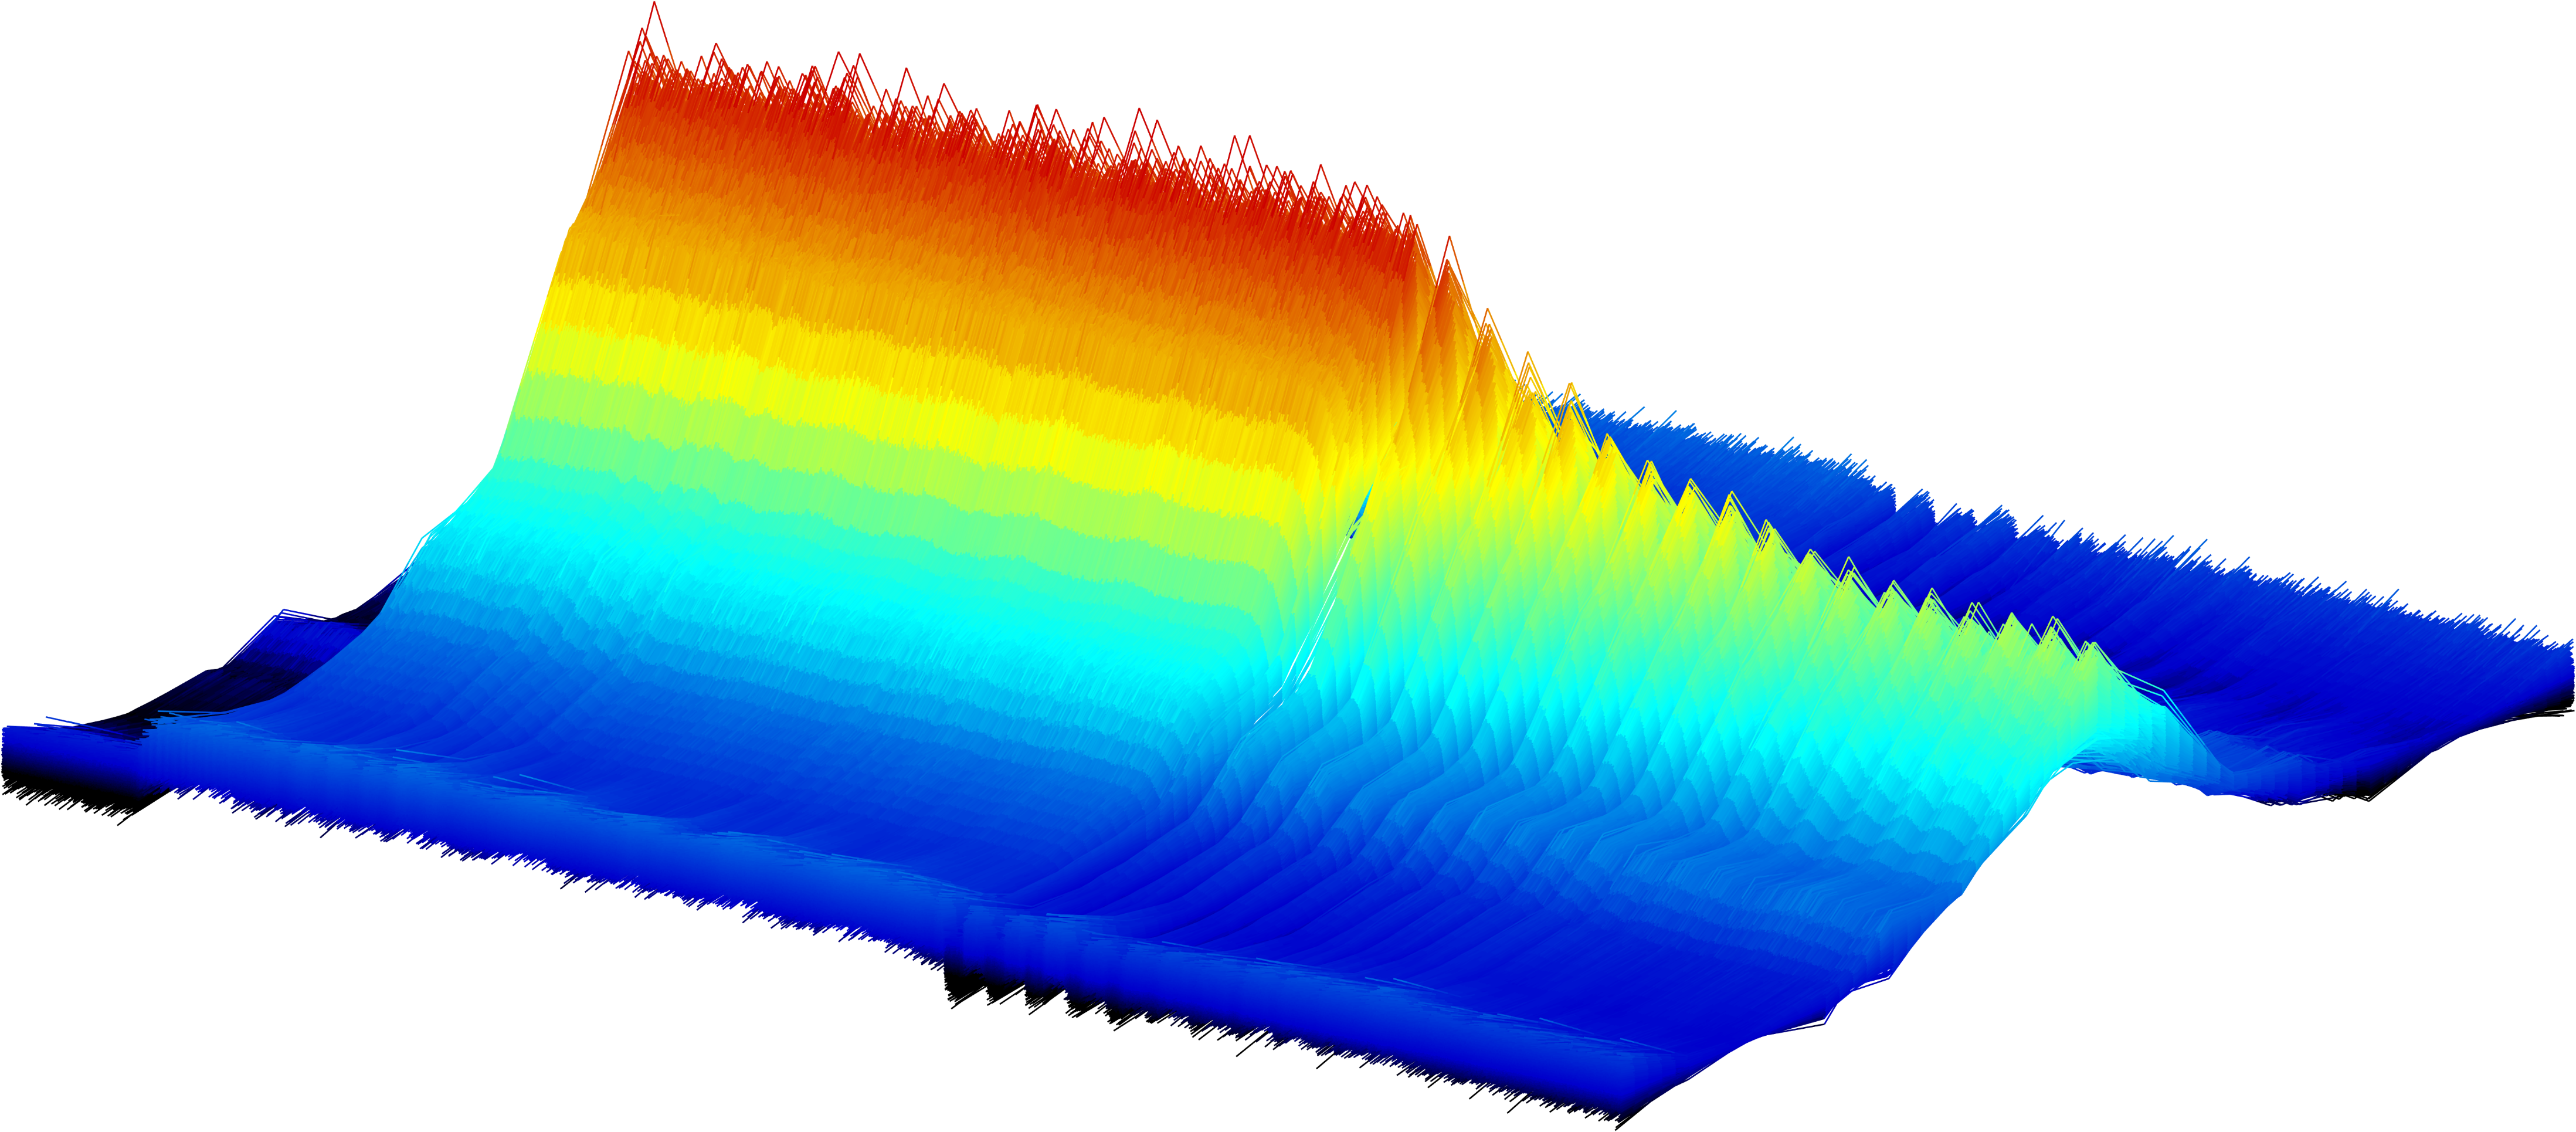 Colorful 3D data plot shows peak in center with red spikes and lower portions in blue.